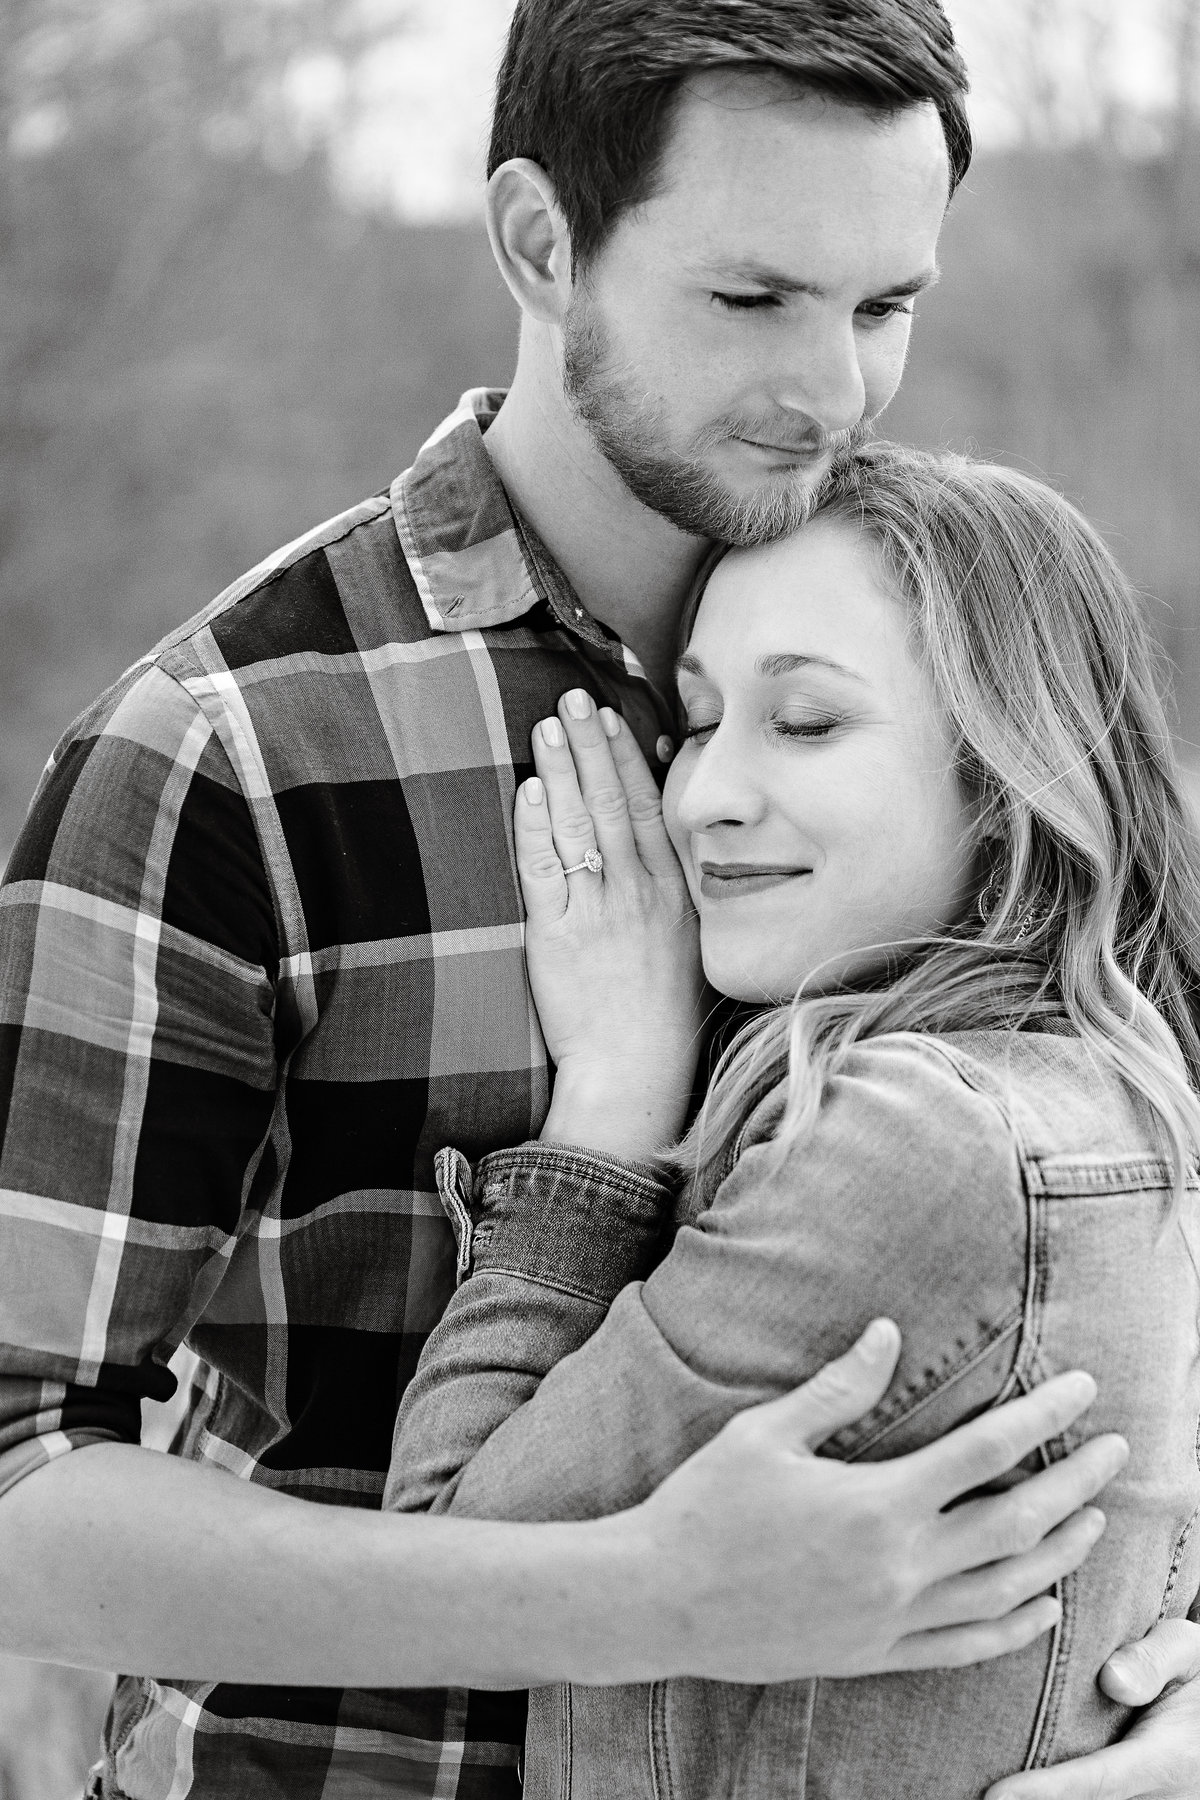 A black and white photo of a young engaged couple embracing sweetly